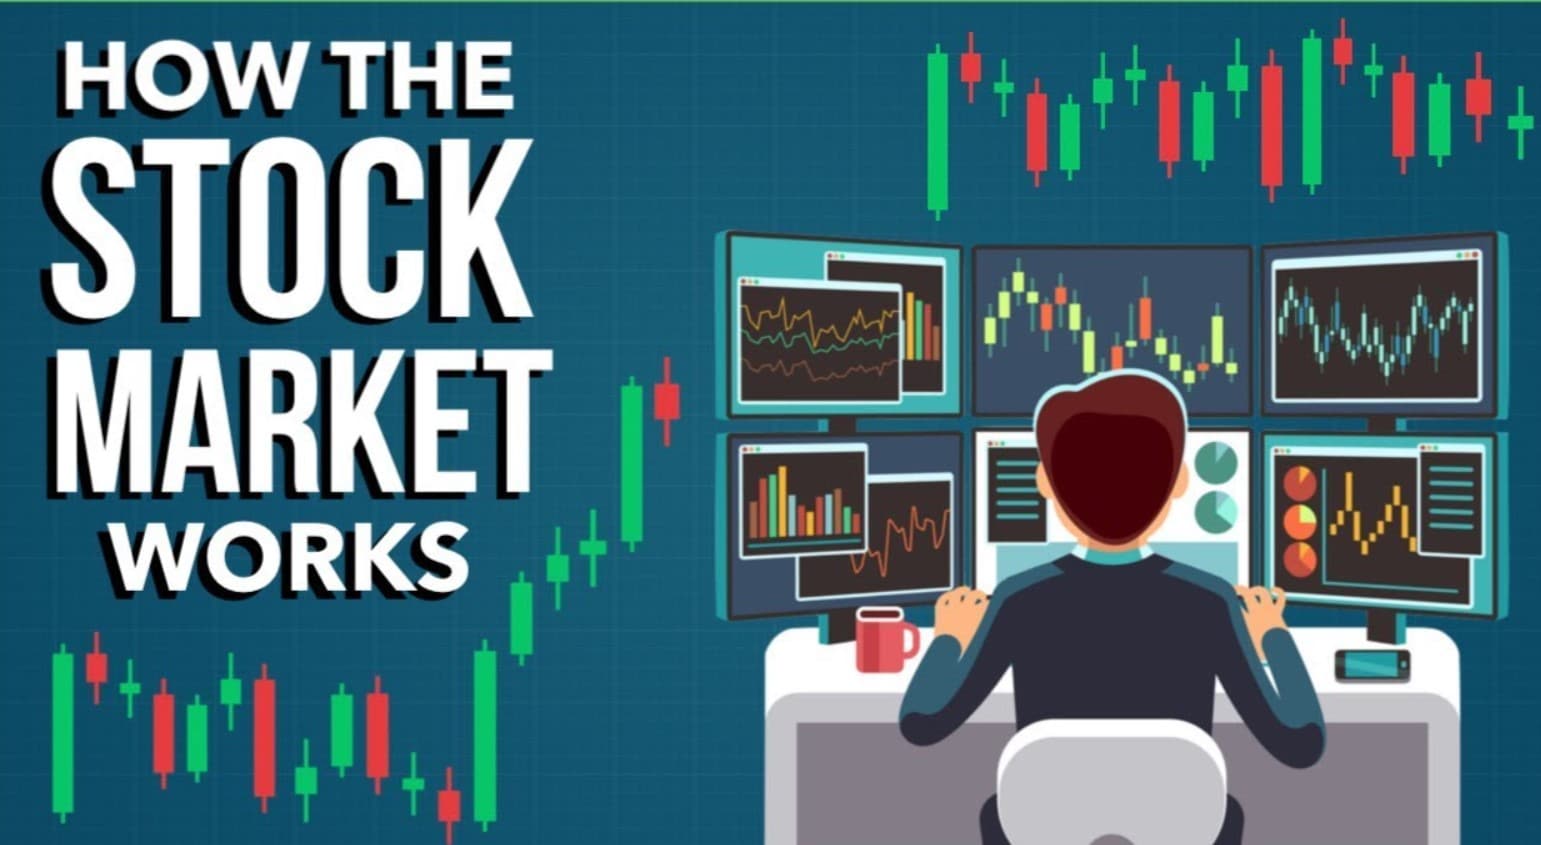 How does the stock market work